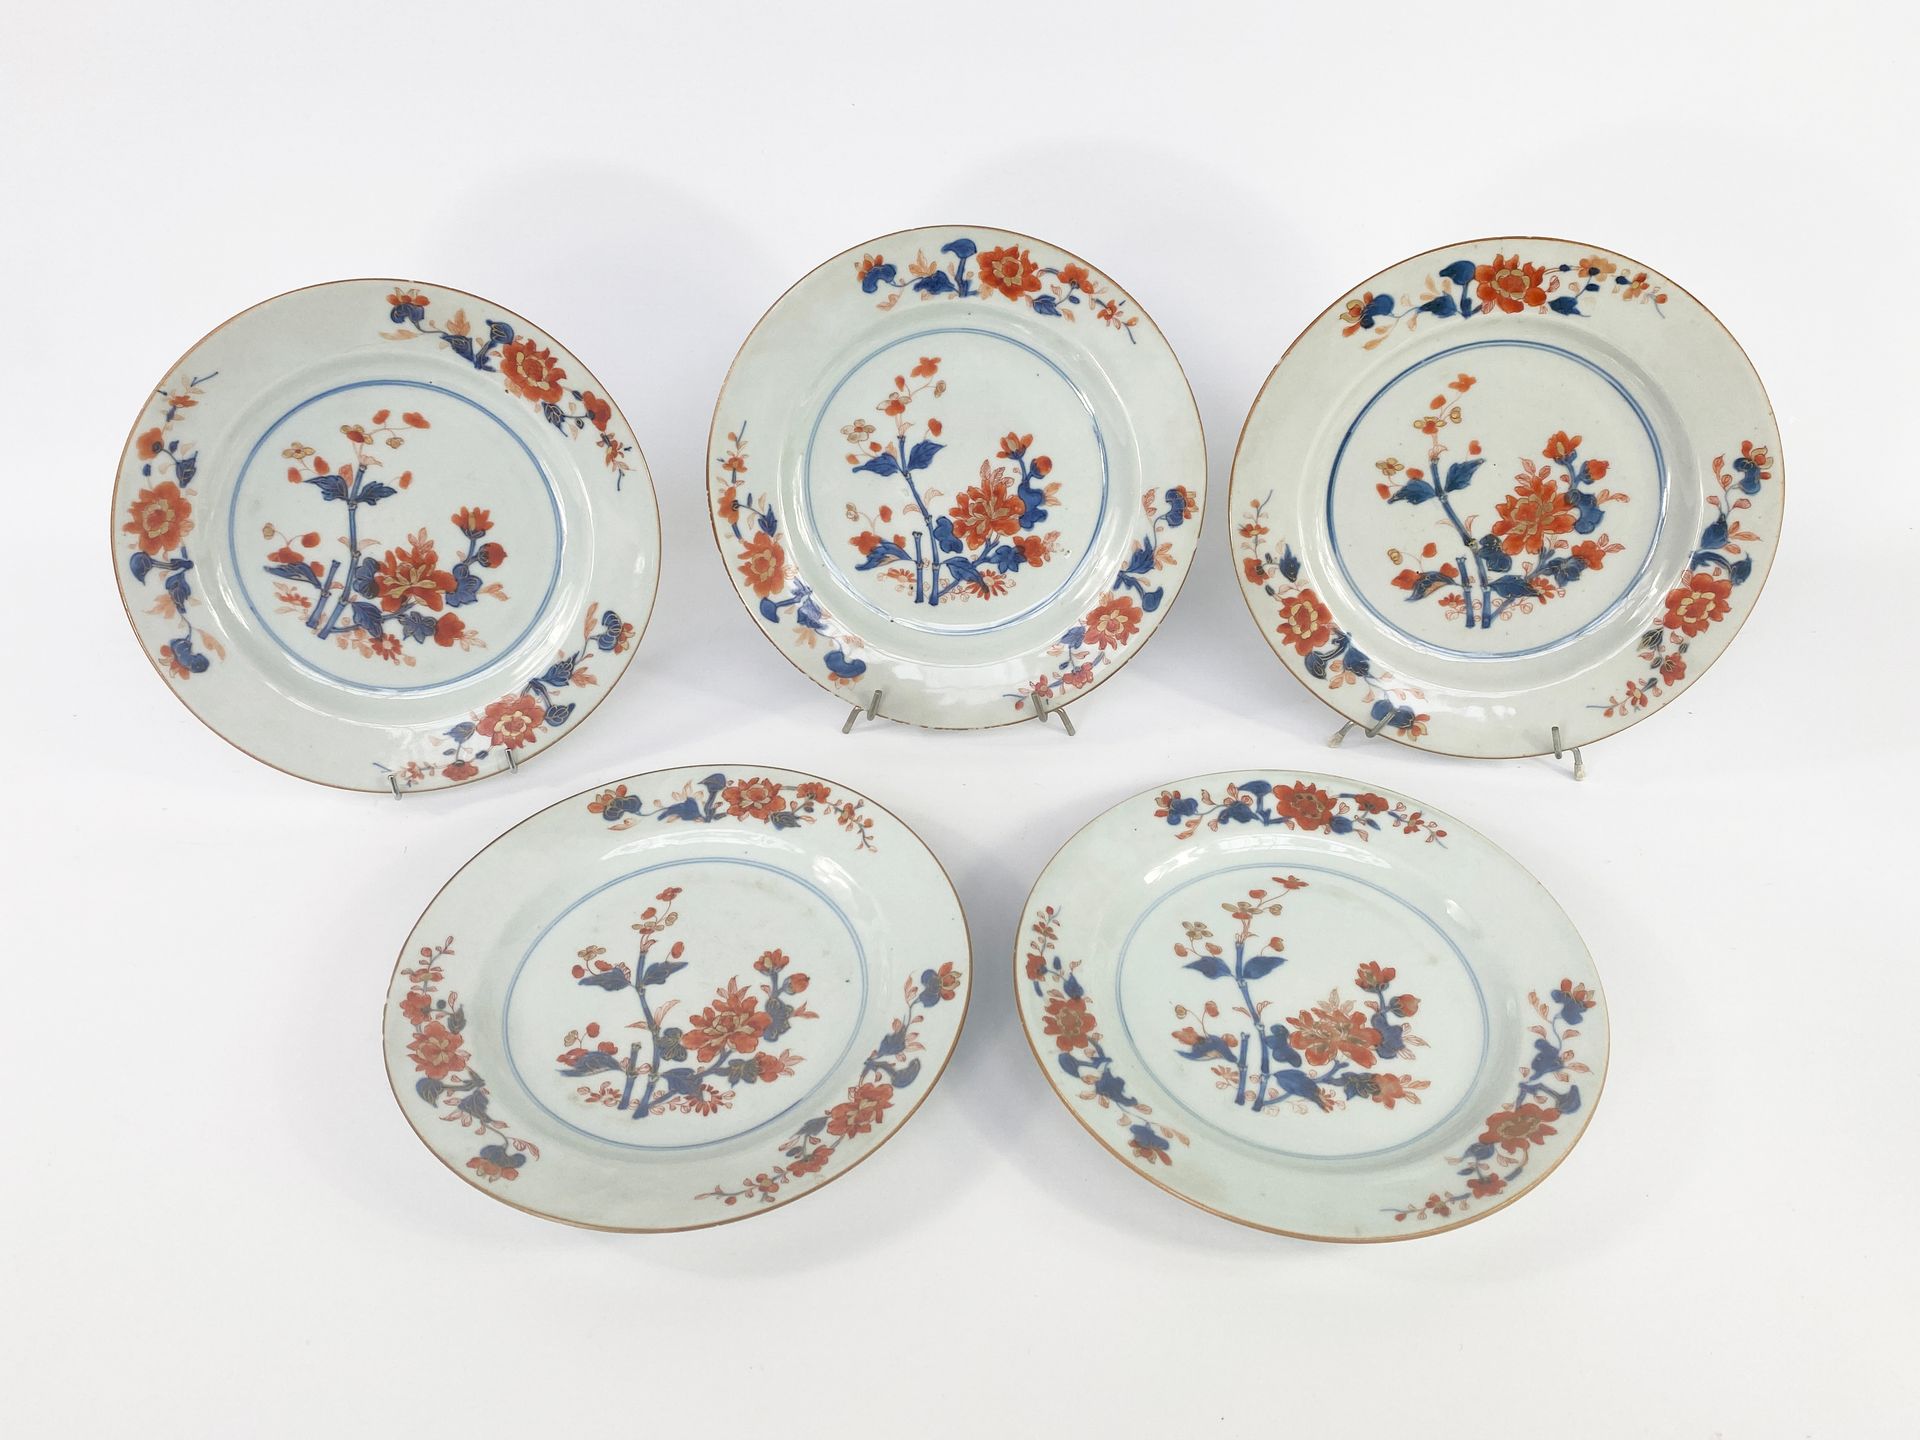 Null CHINA, Compagnie des Indes, 18th century.

Set of five porcelain plates wit&hellip;